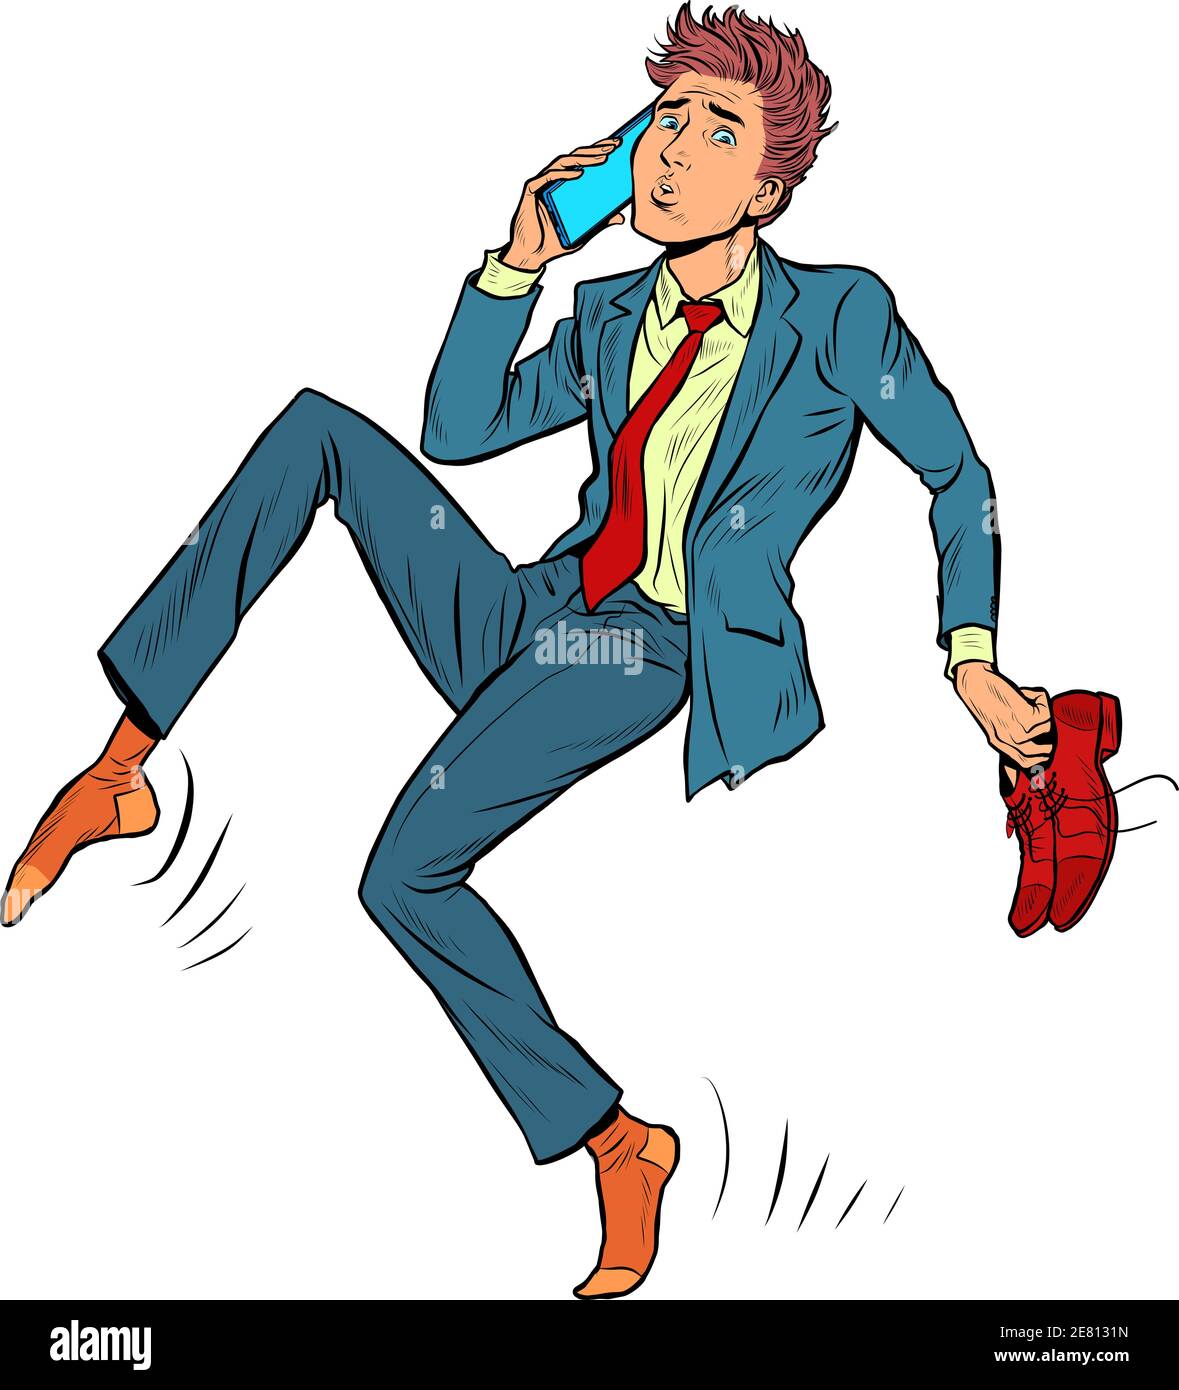 The man sneaks up quietly. Shoes in hand, talking on the phone Stock Vector